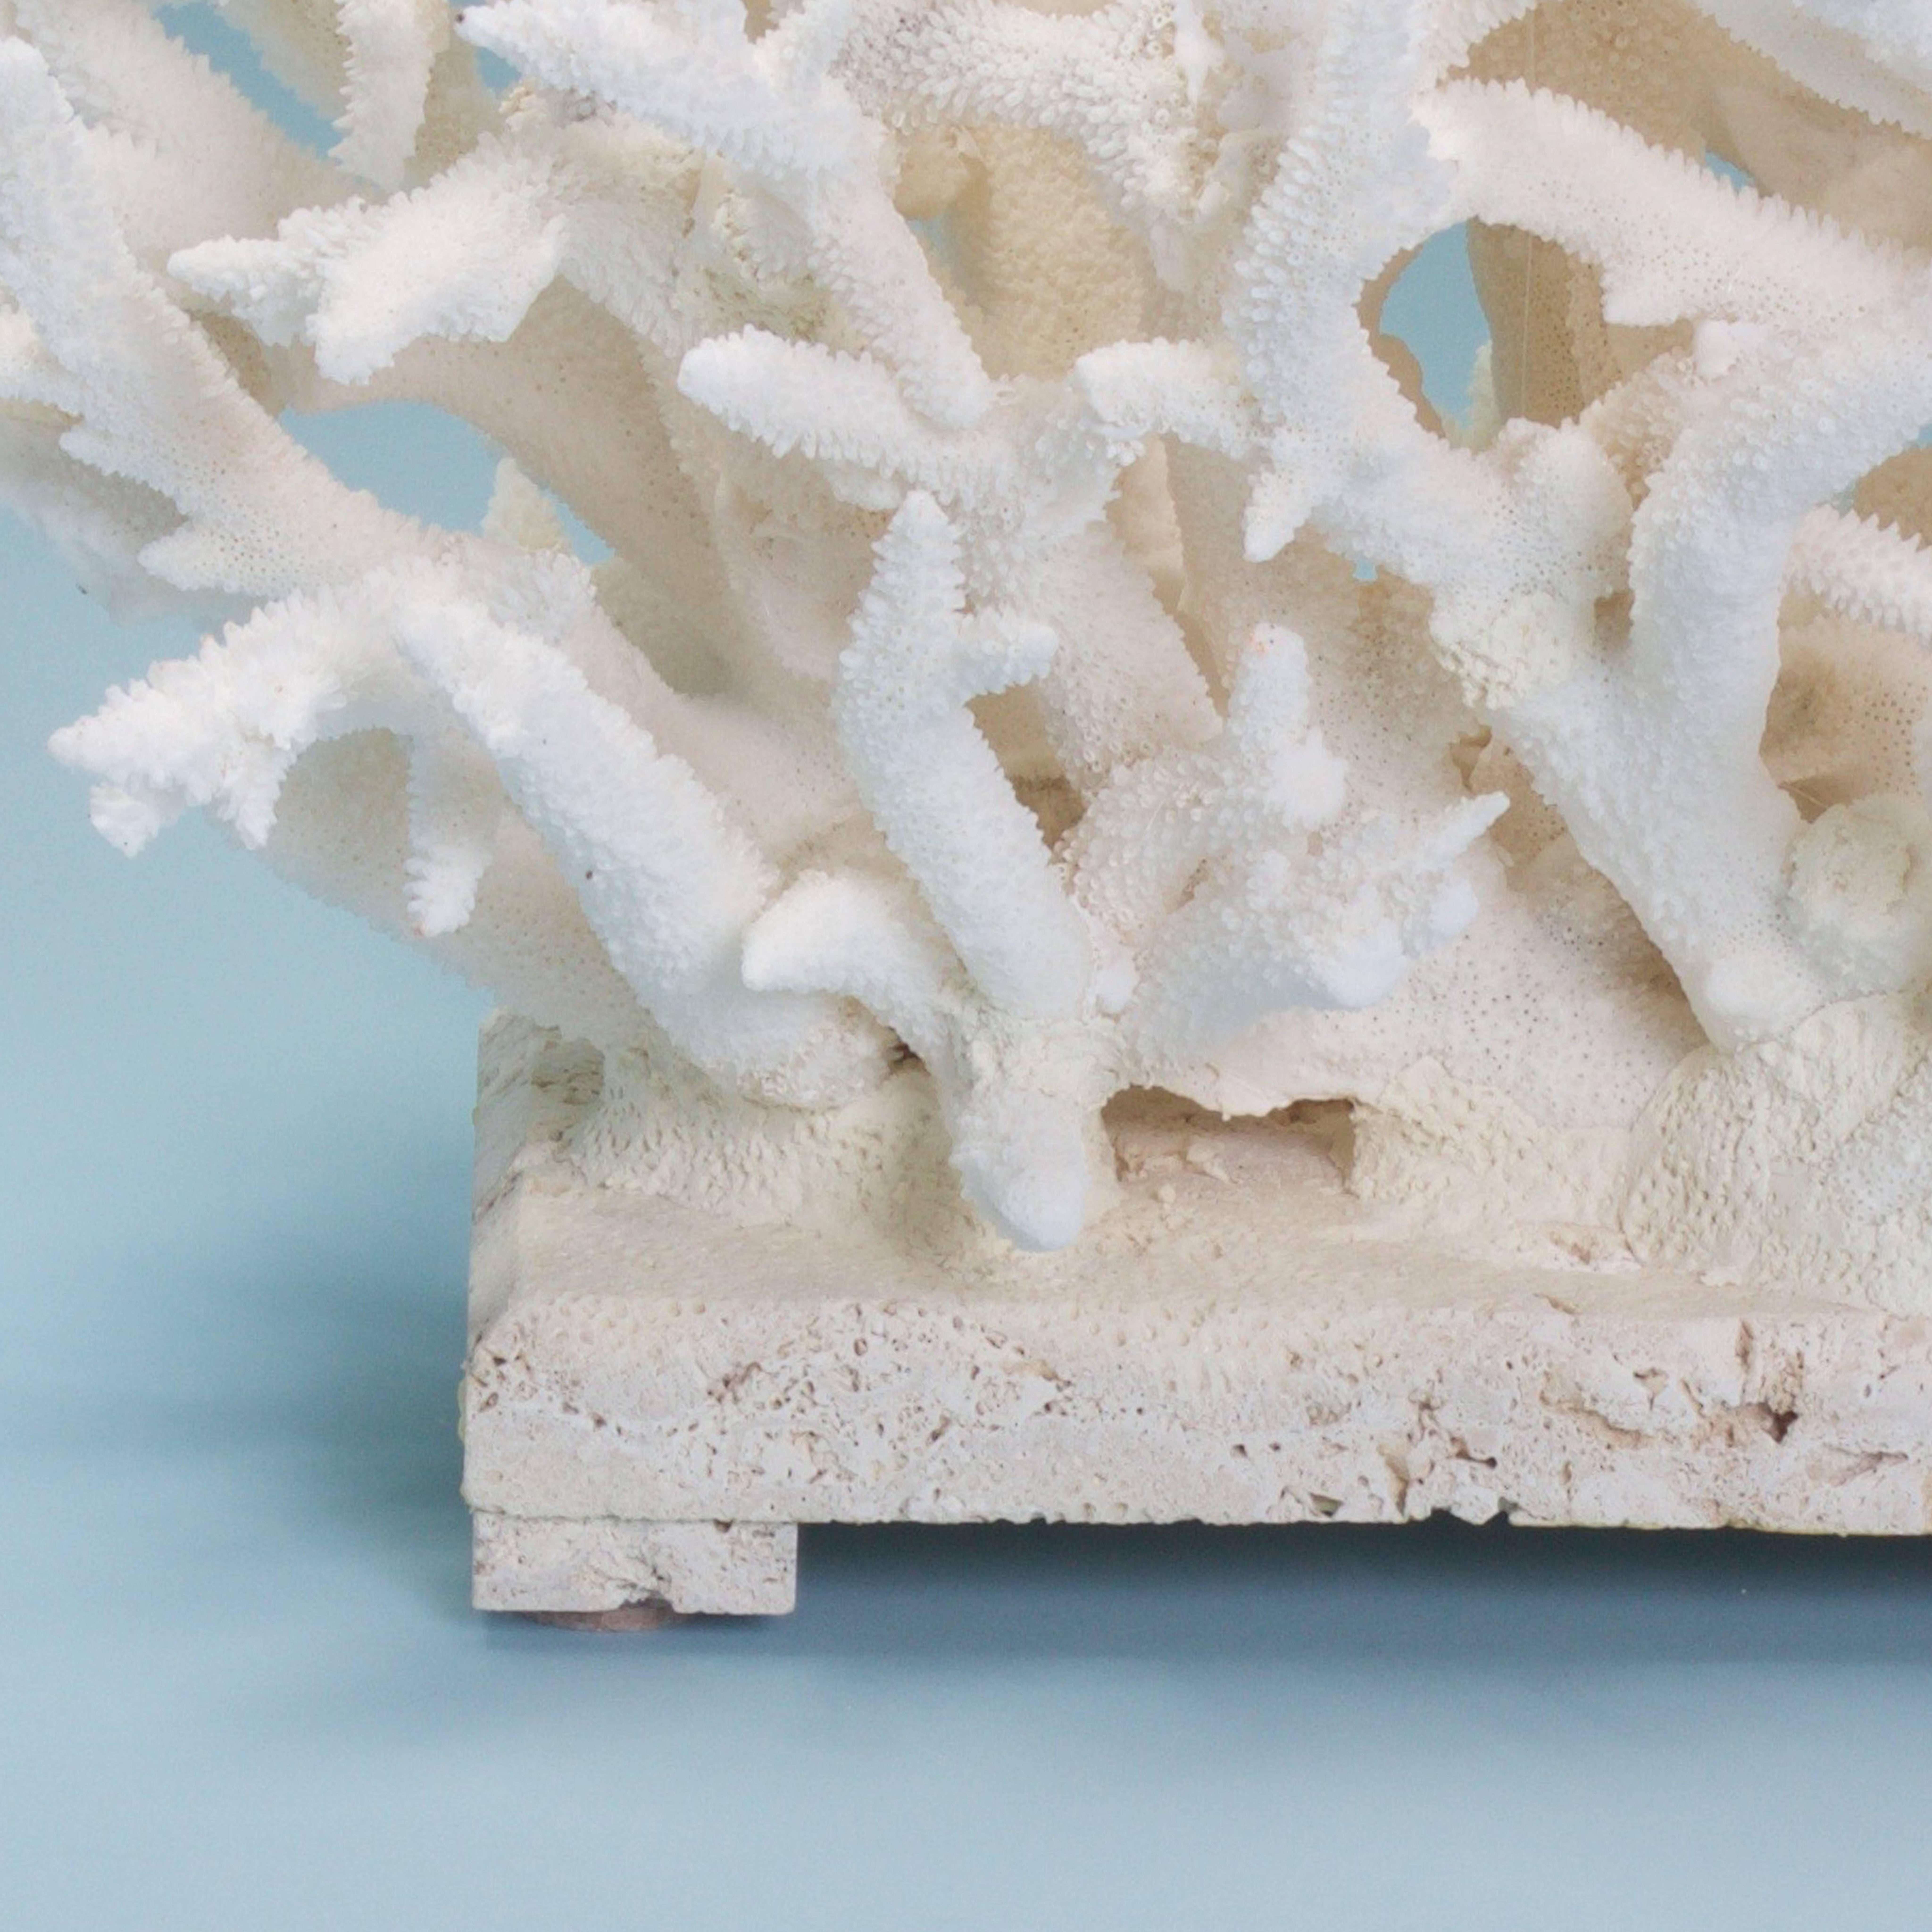 Contemporary Organic Modern Staghorn Coral Sculpture